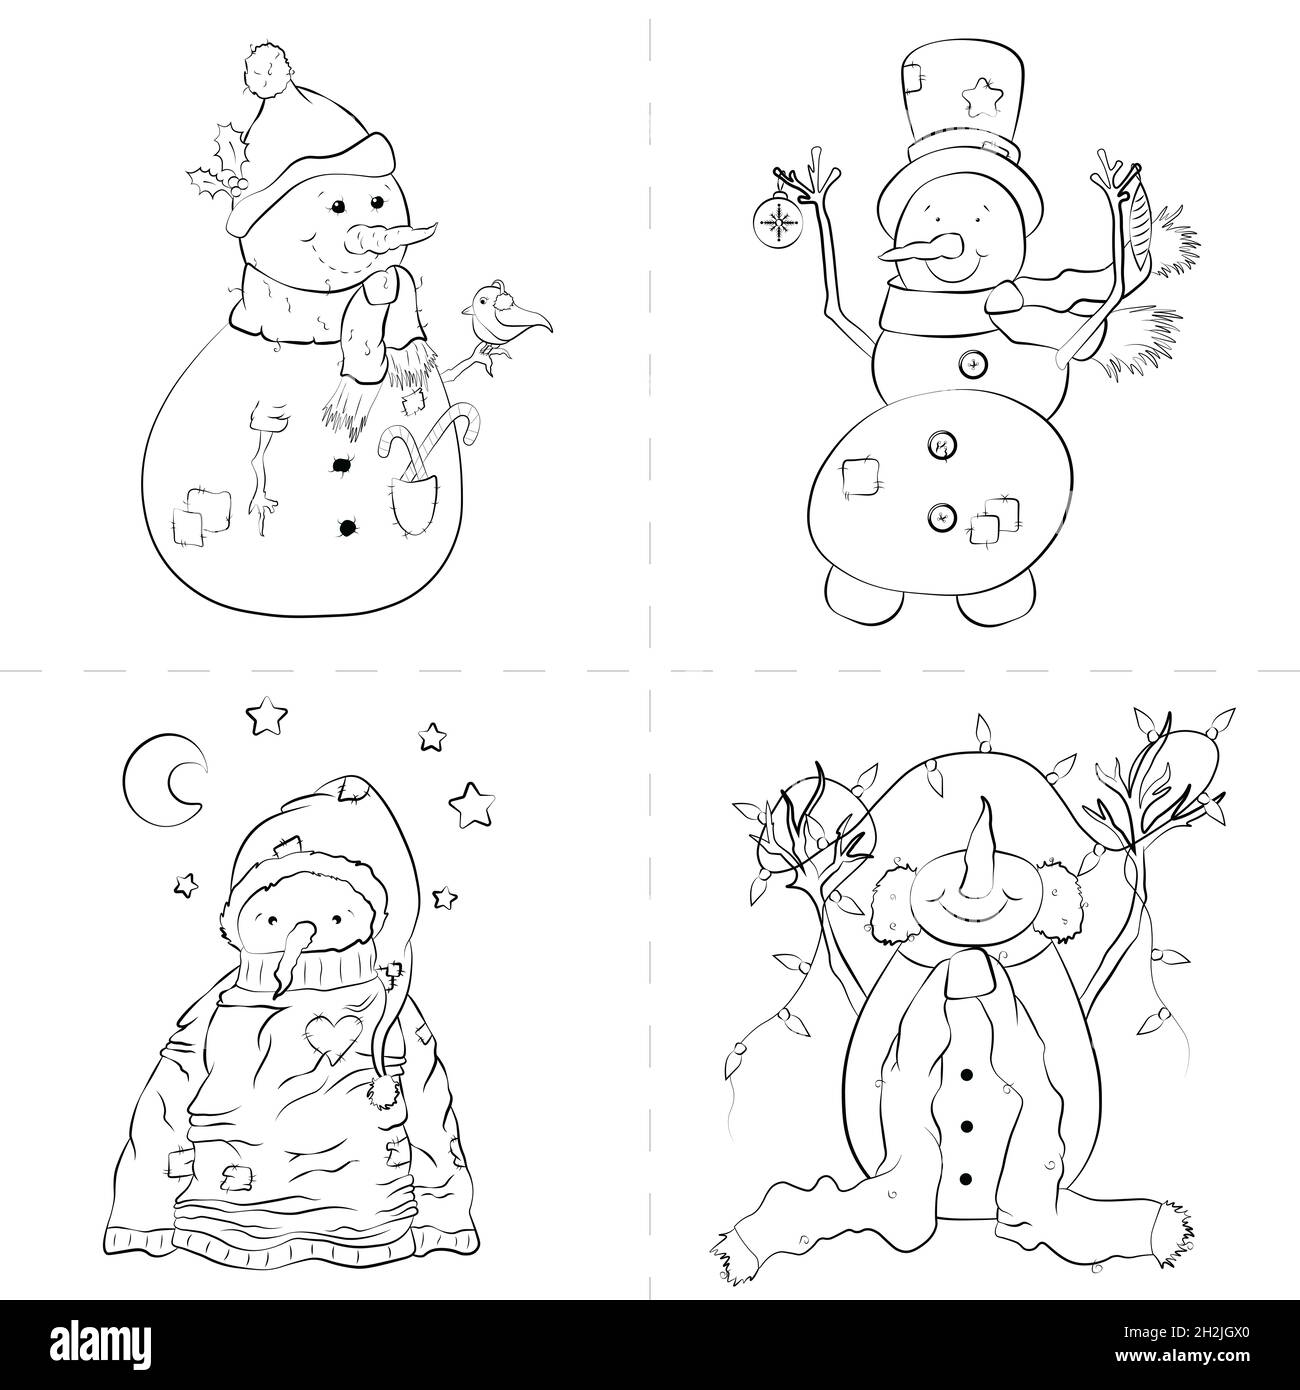 Illustration of funny snowman Christmas character set coloring book ...